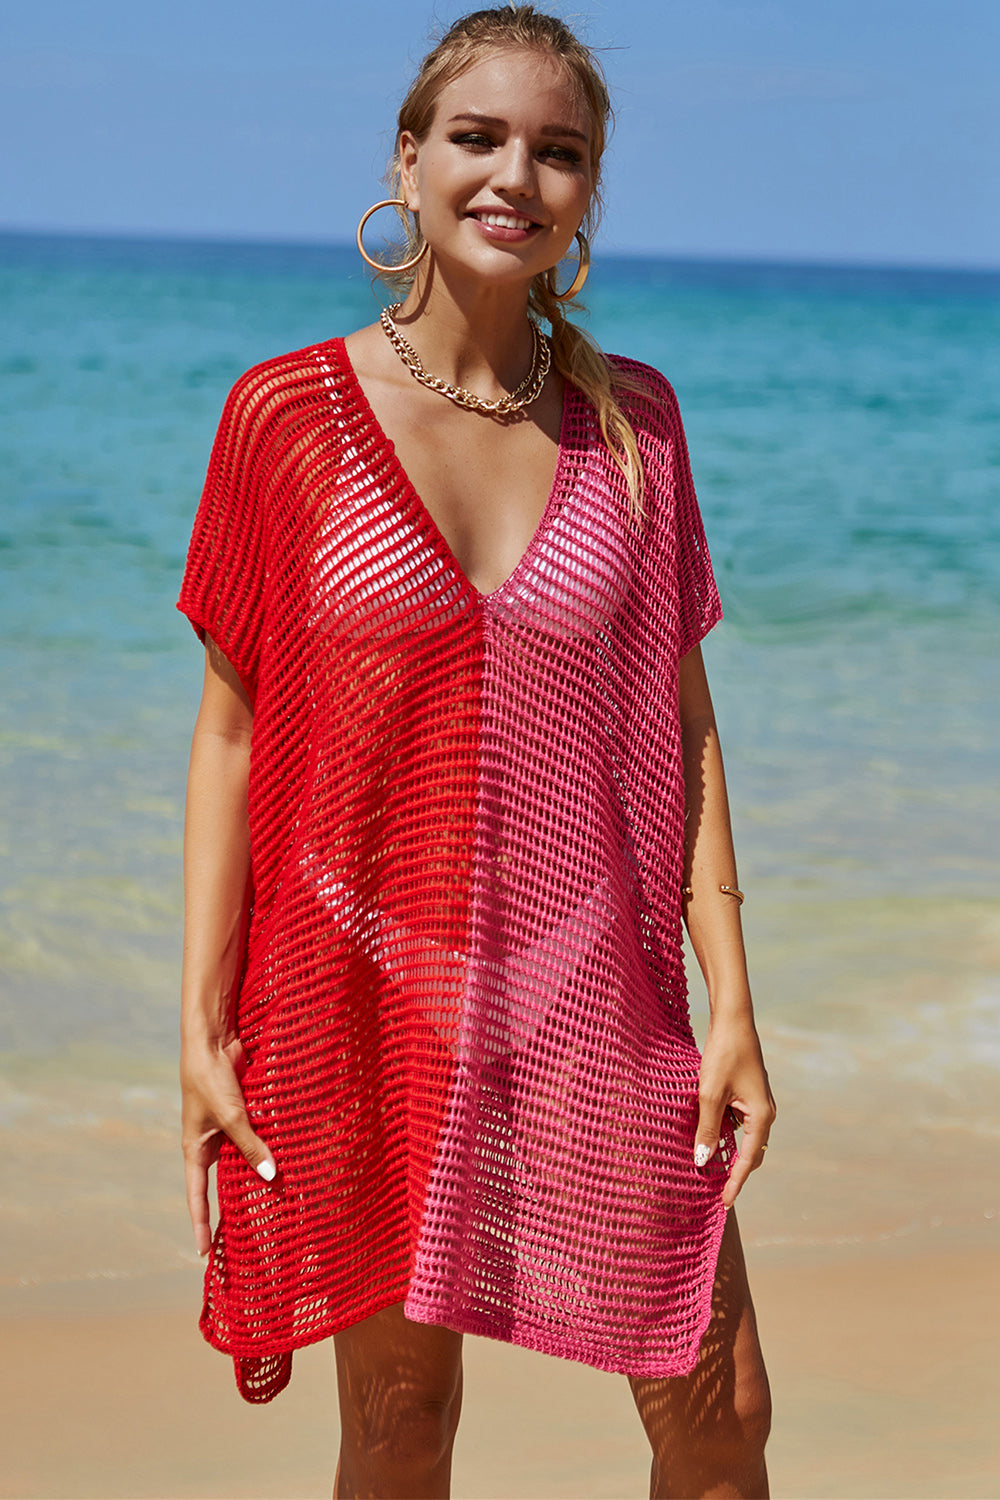 Double Take Openwork Contrast Slit Knit Cover Up Swimwear Trendsi Red One Size 